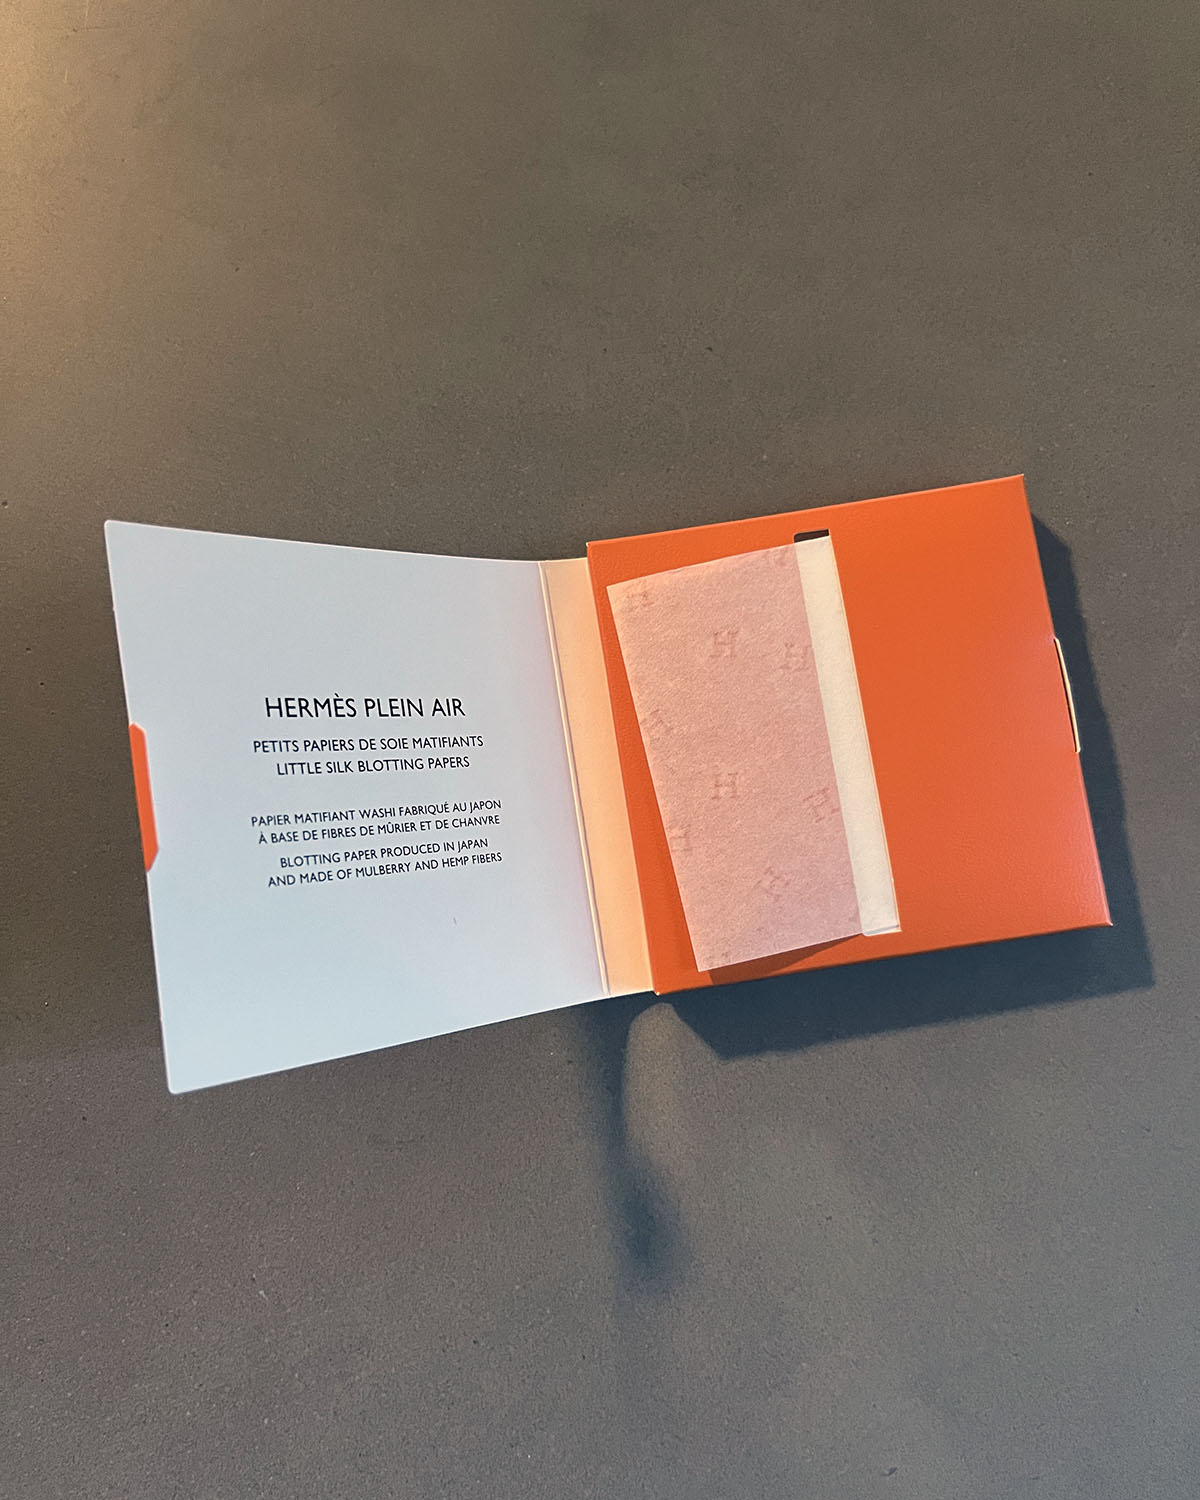 Are Hermés Beauty's Blotting Papers Worth It?